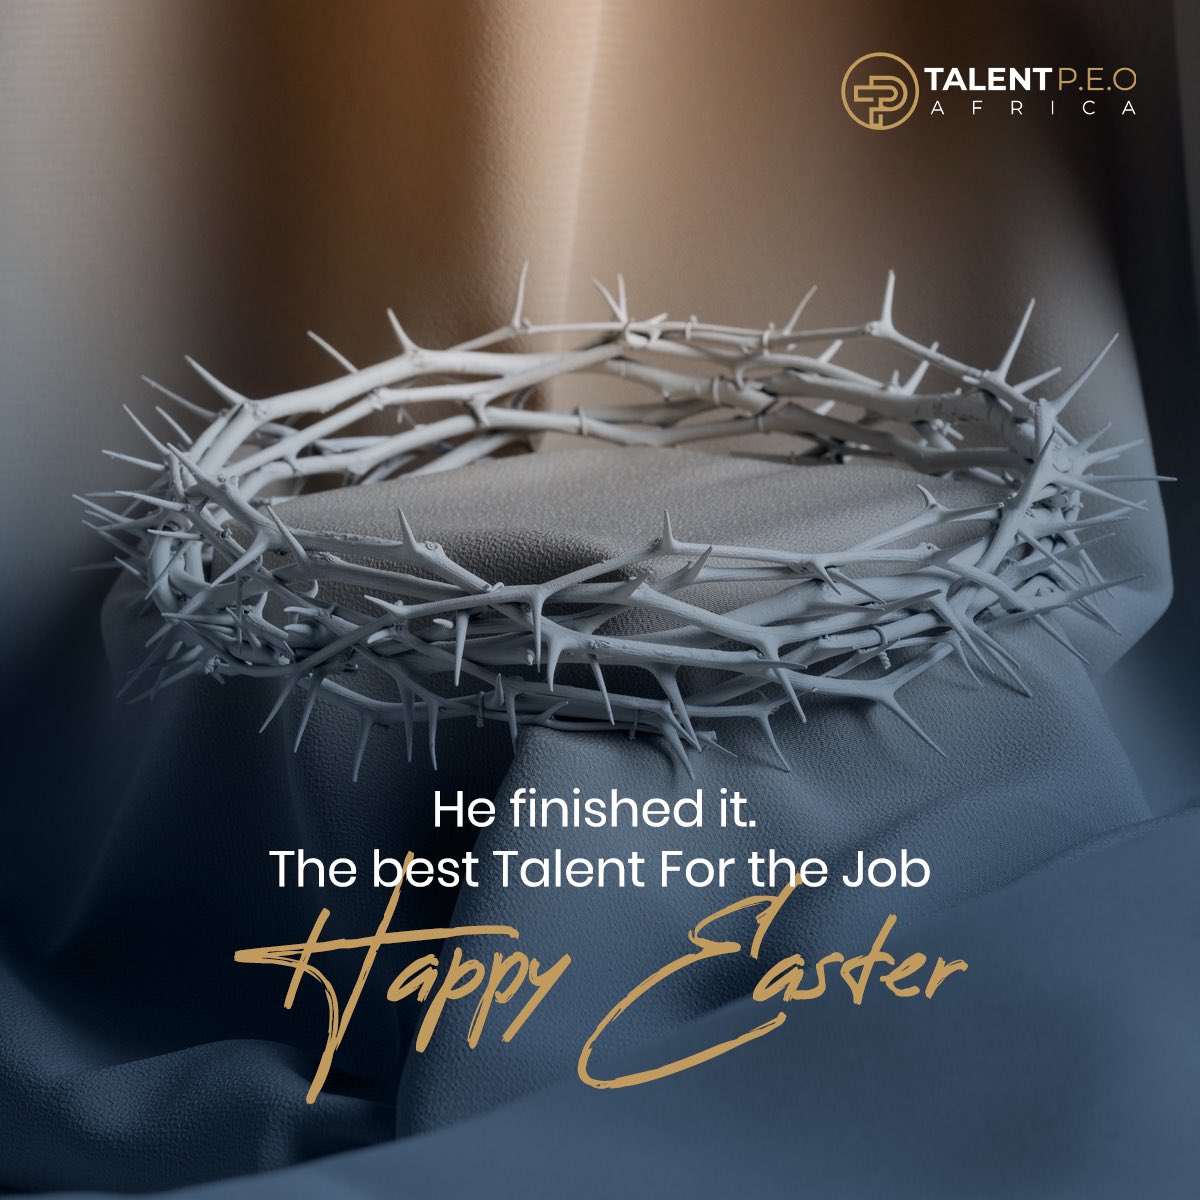 No other Talent could have done it better!

An example to be the best in what we do.

Happy Easter.

#Talentpeo #happyeaster #easter2023 #employerofrecord #workforcesolutions #hrcommunity #hrsolution